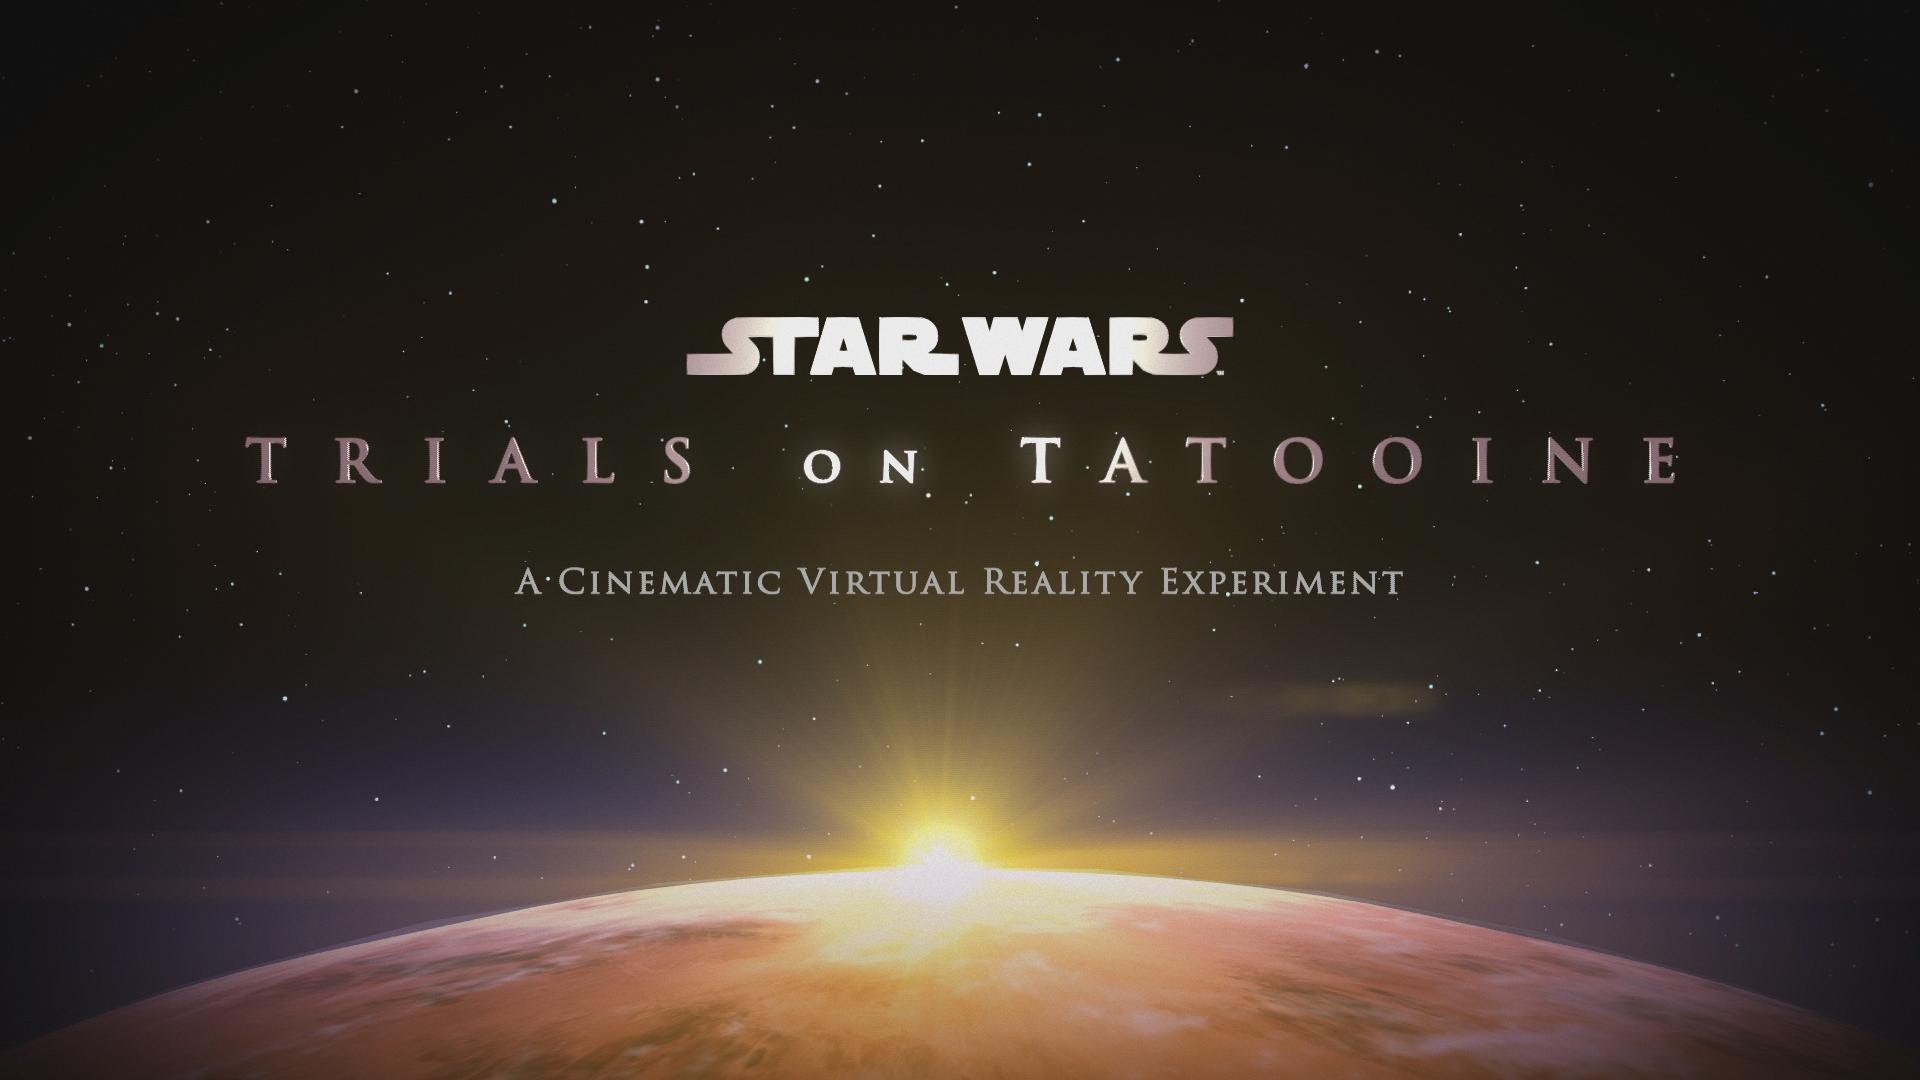 David Goyer Collaborates with Industrial Light and Magic to produce and release a VR movie about Darth Vader